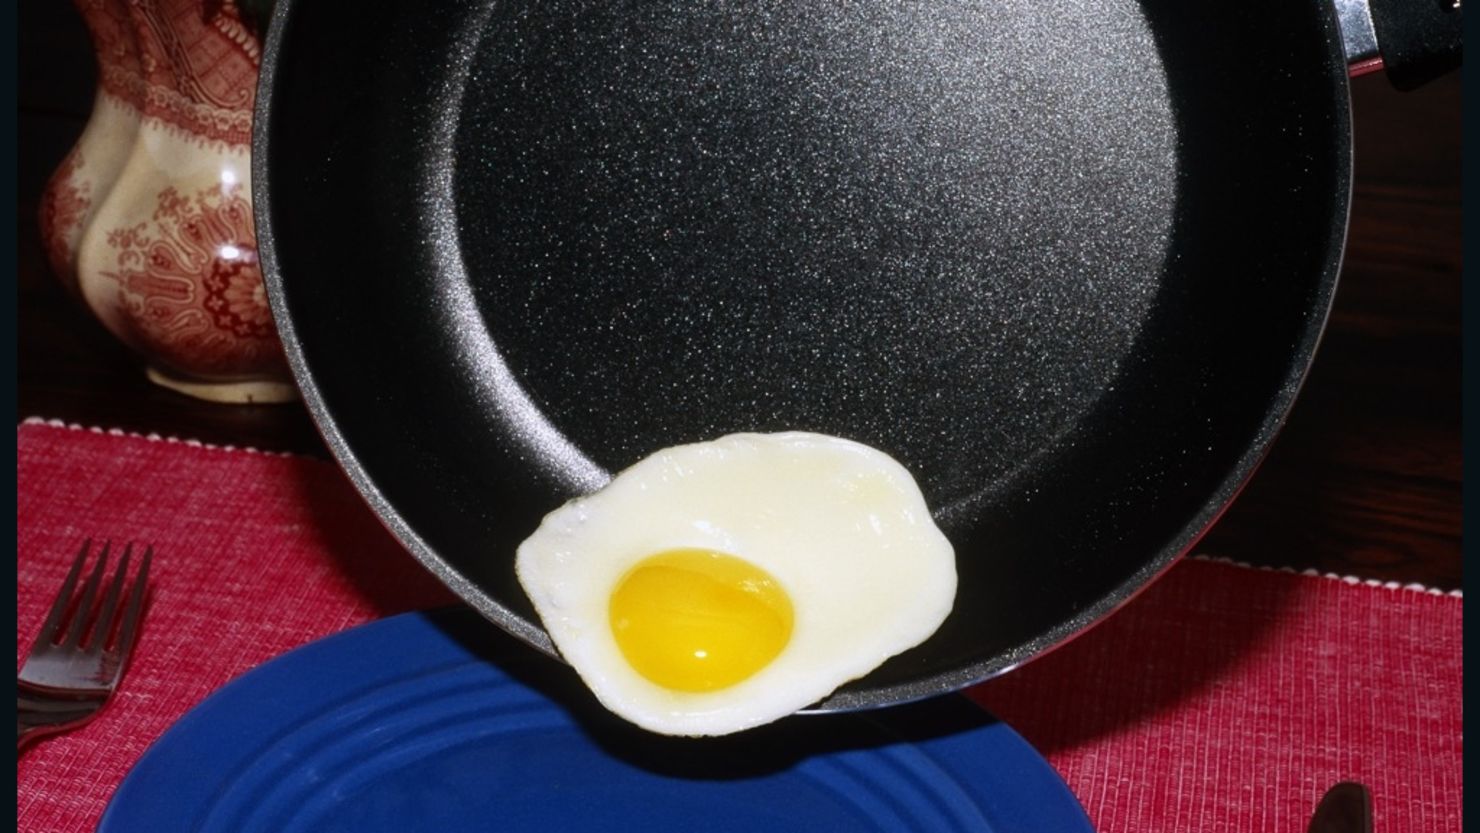 The chemical industry doesn't want you to be afraid of Teflon pans